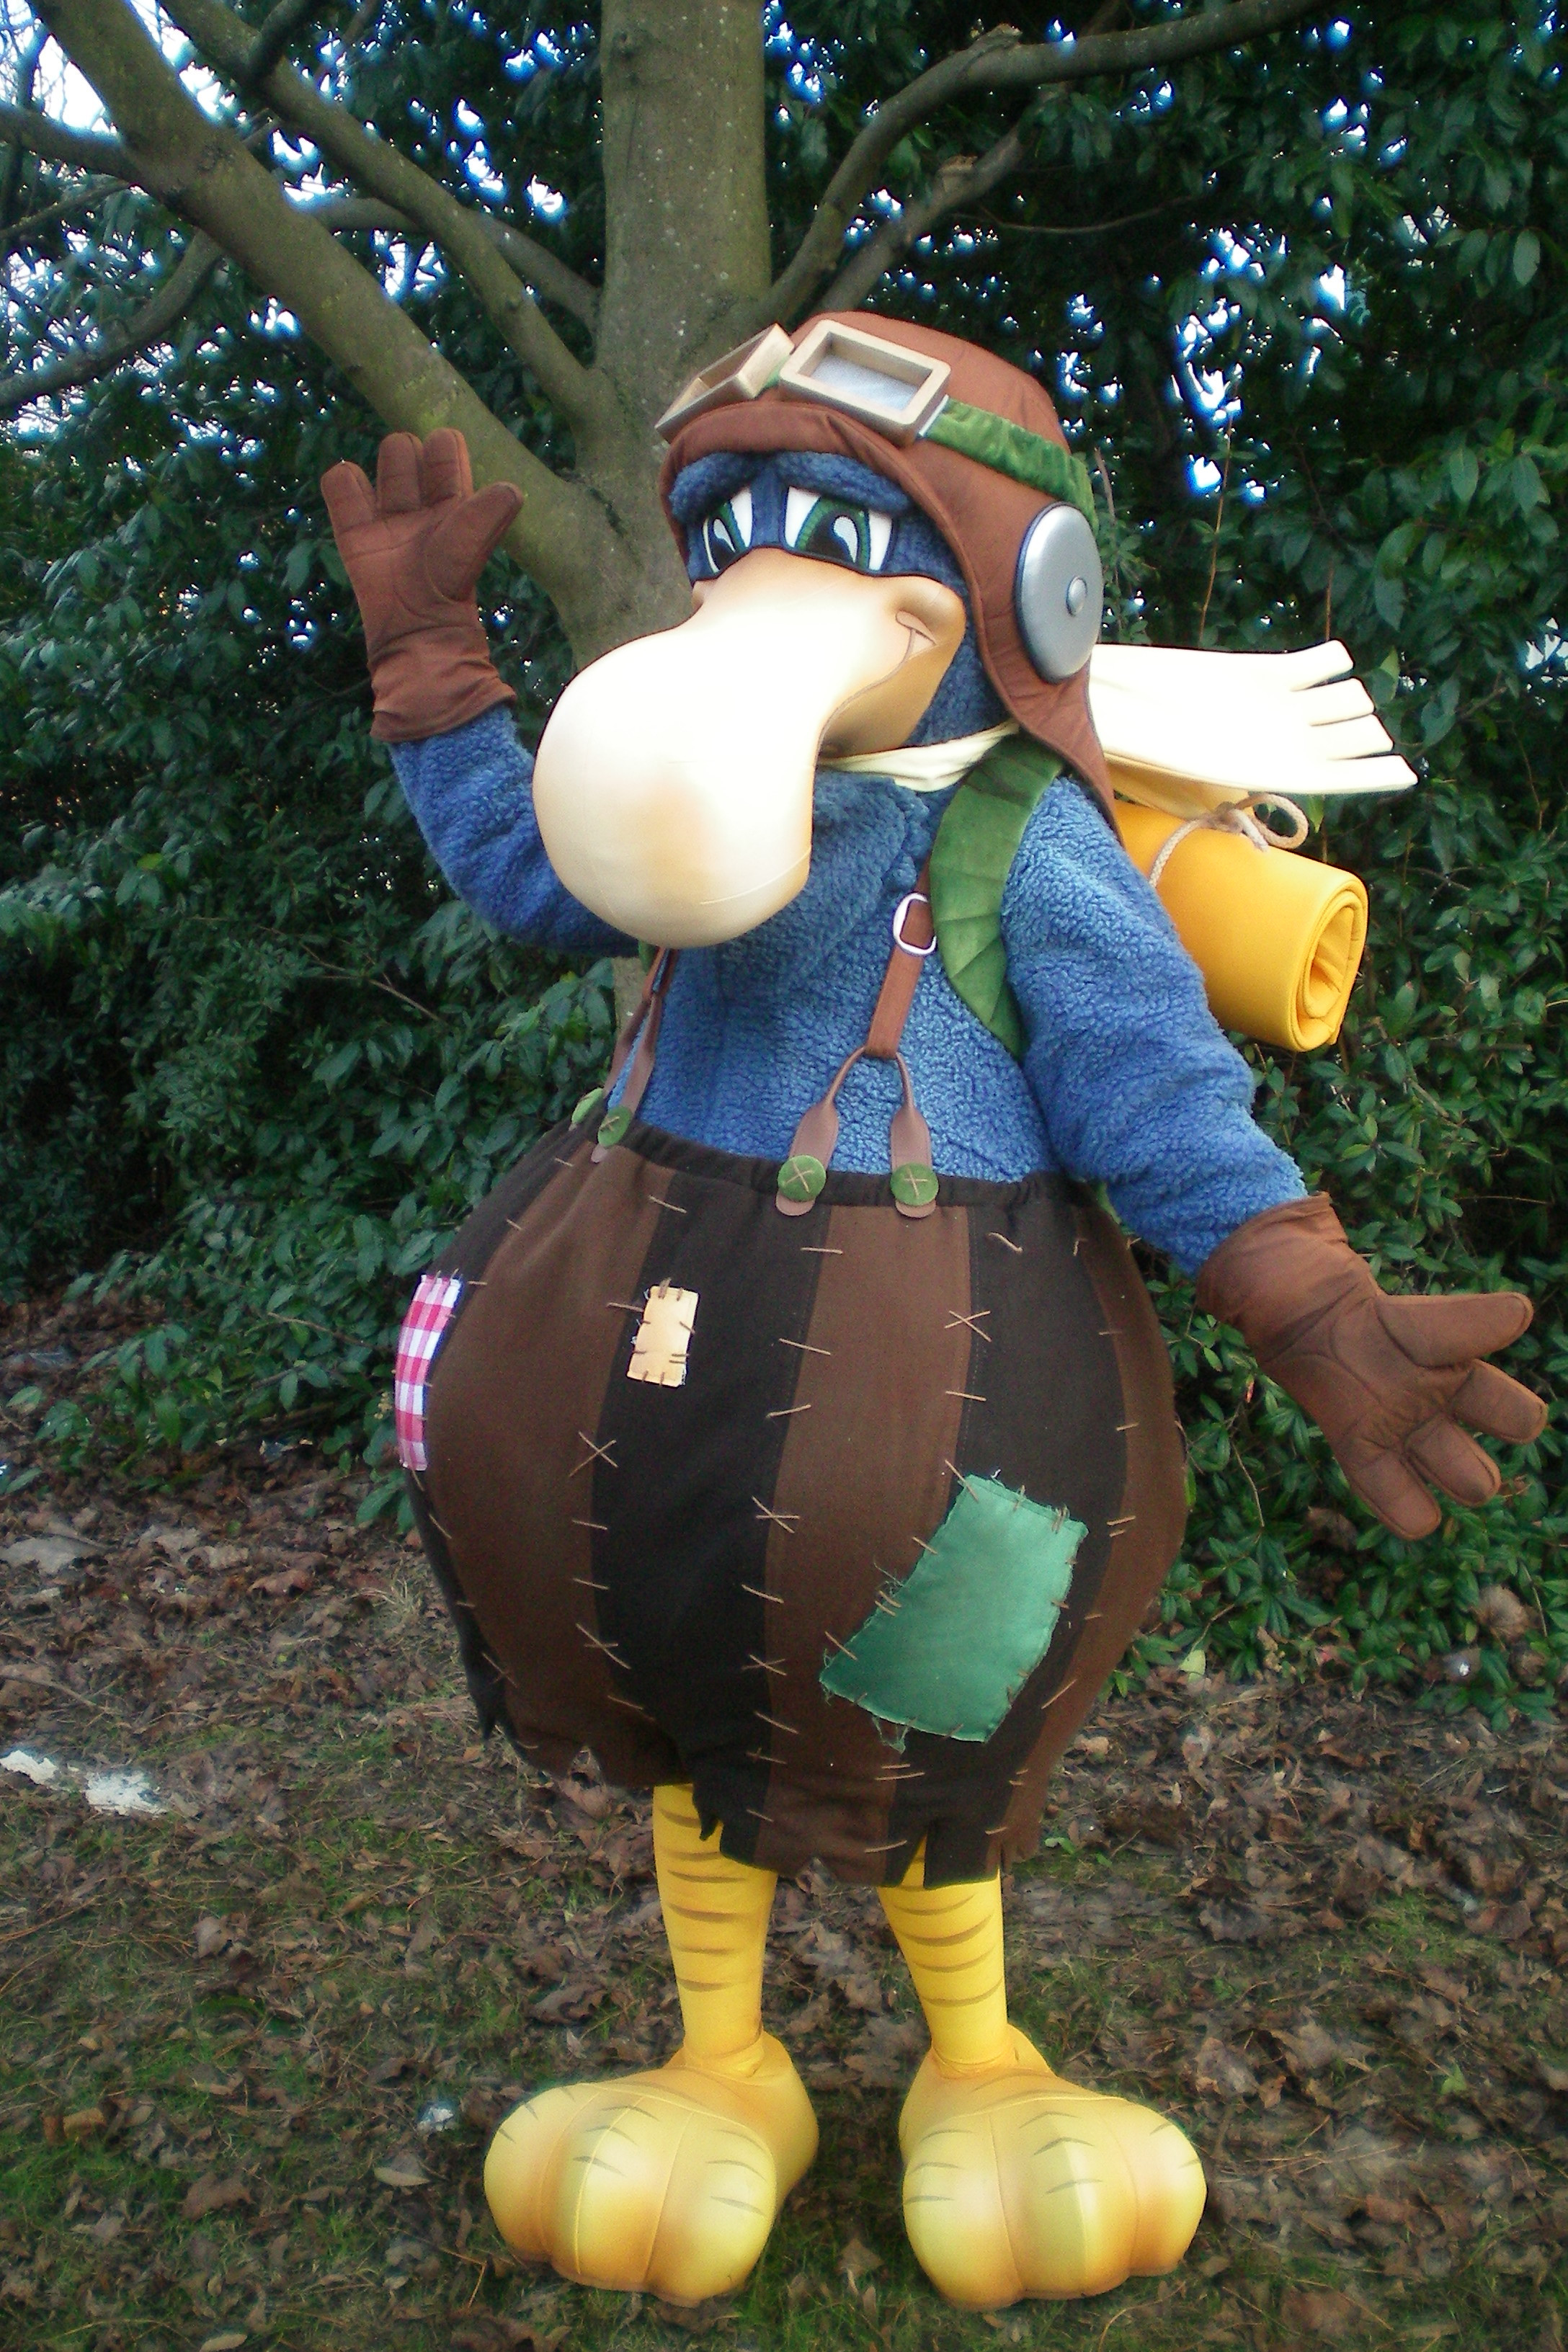 Final Mascot Costume made by
www.rainbowproductions.co.uk